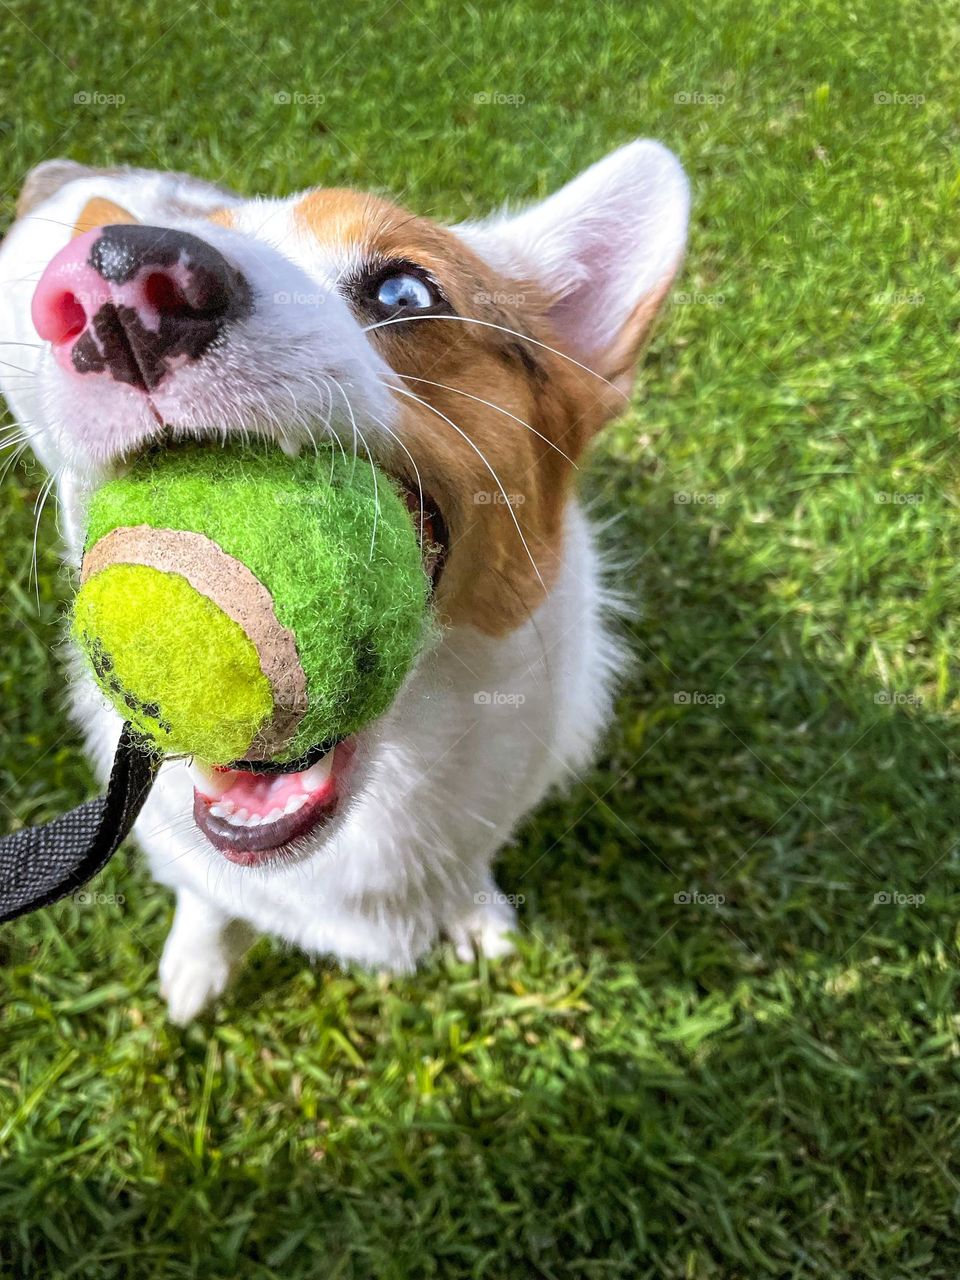 Happy dog corgi pet animal outside outdoors green grass blue eyes cute adorable best friend service dog playing playtime happy vibes 